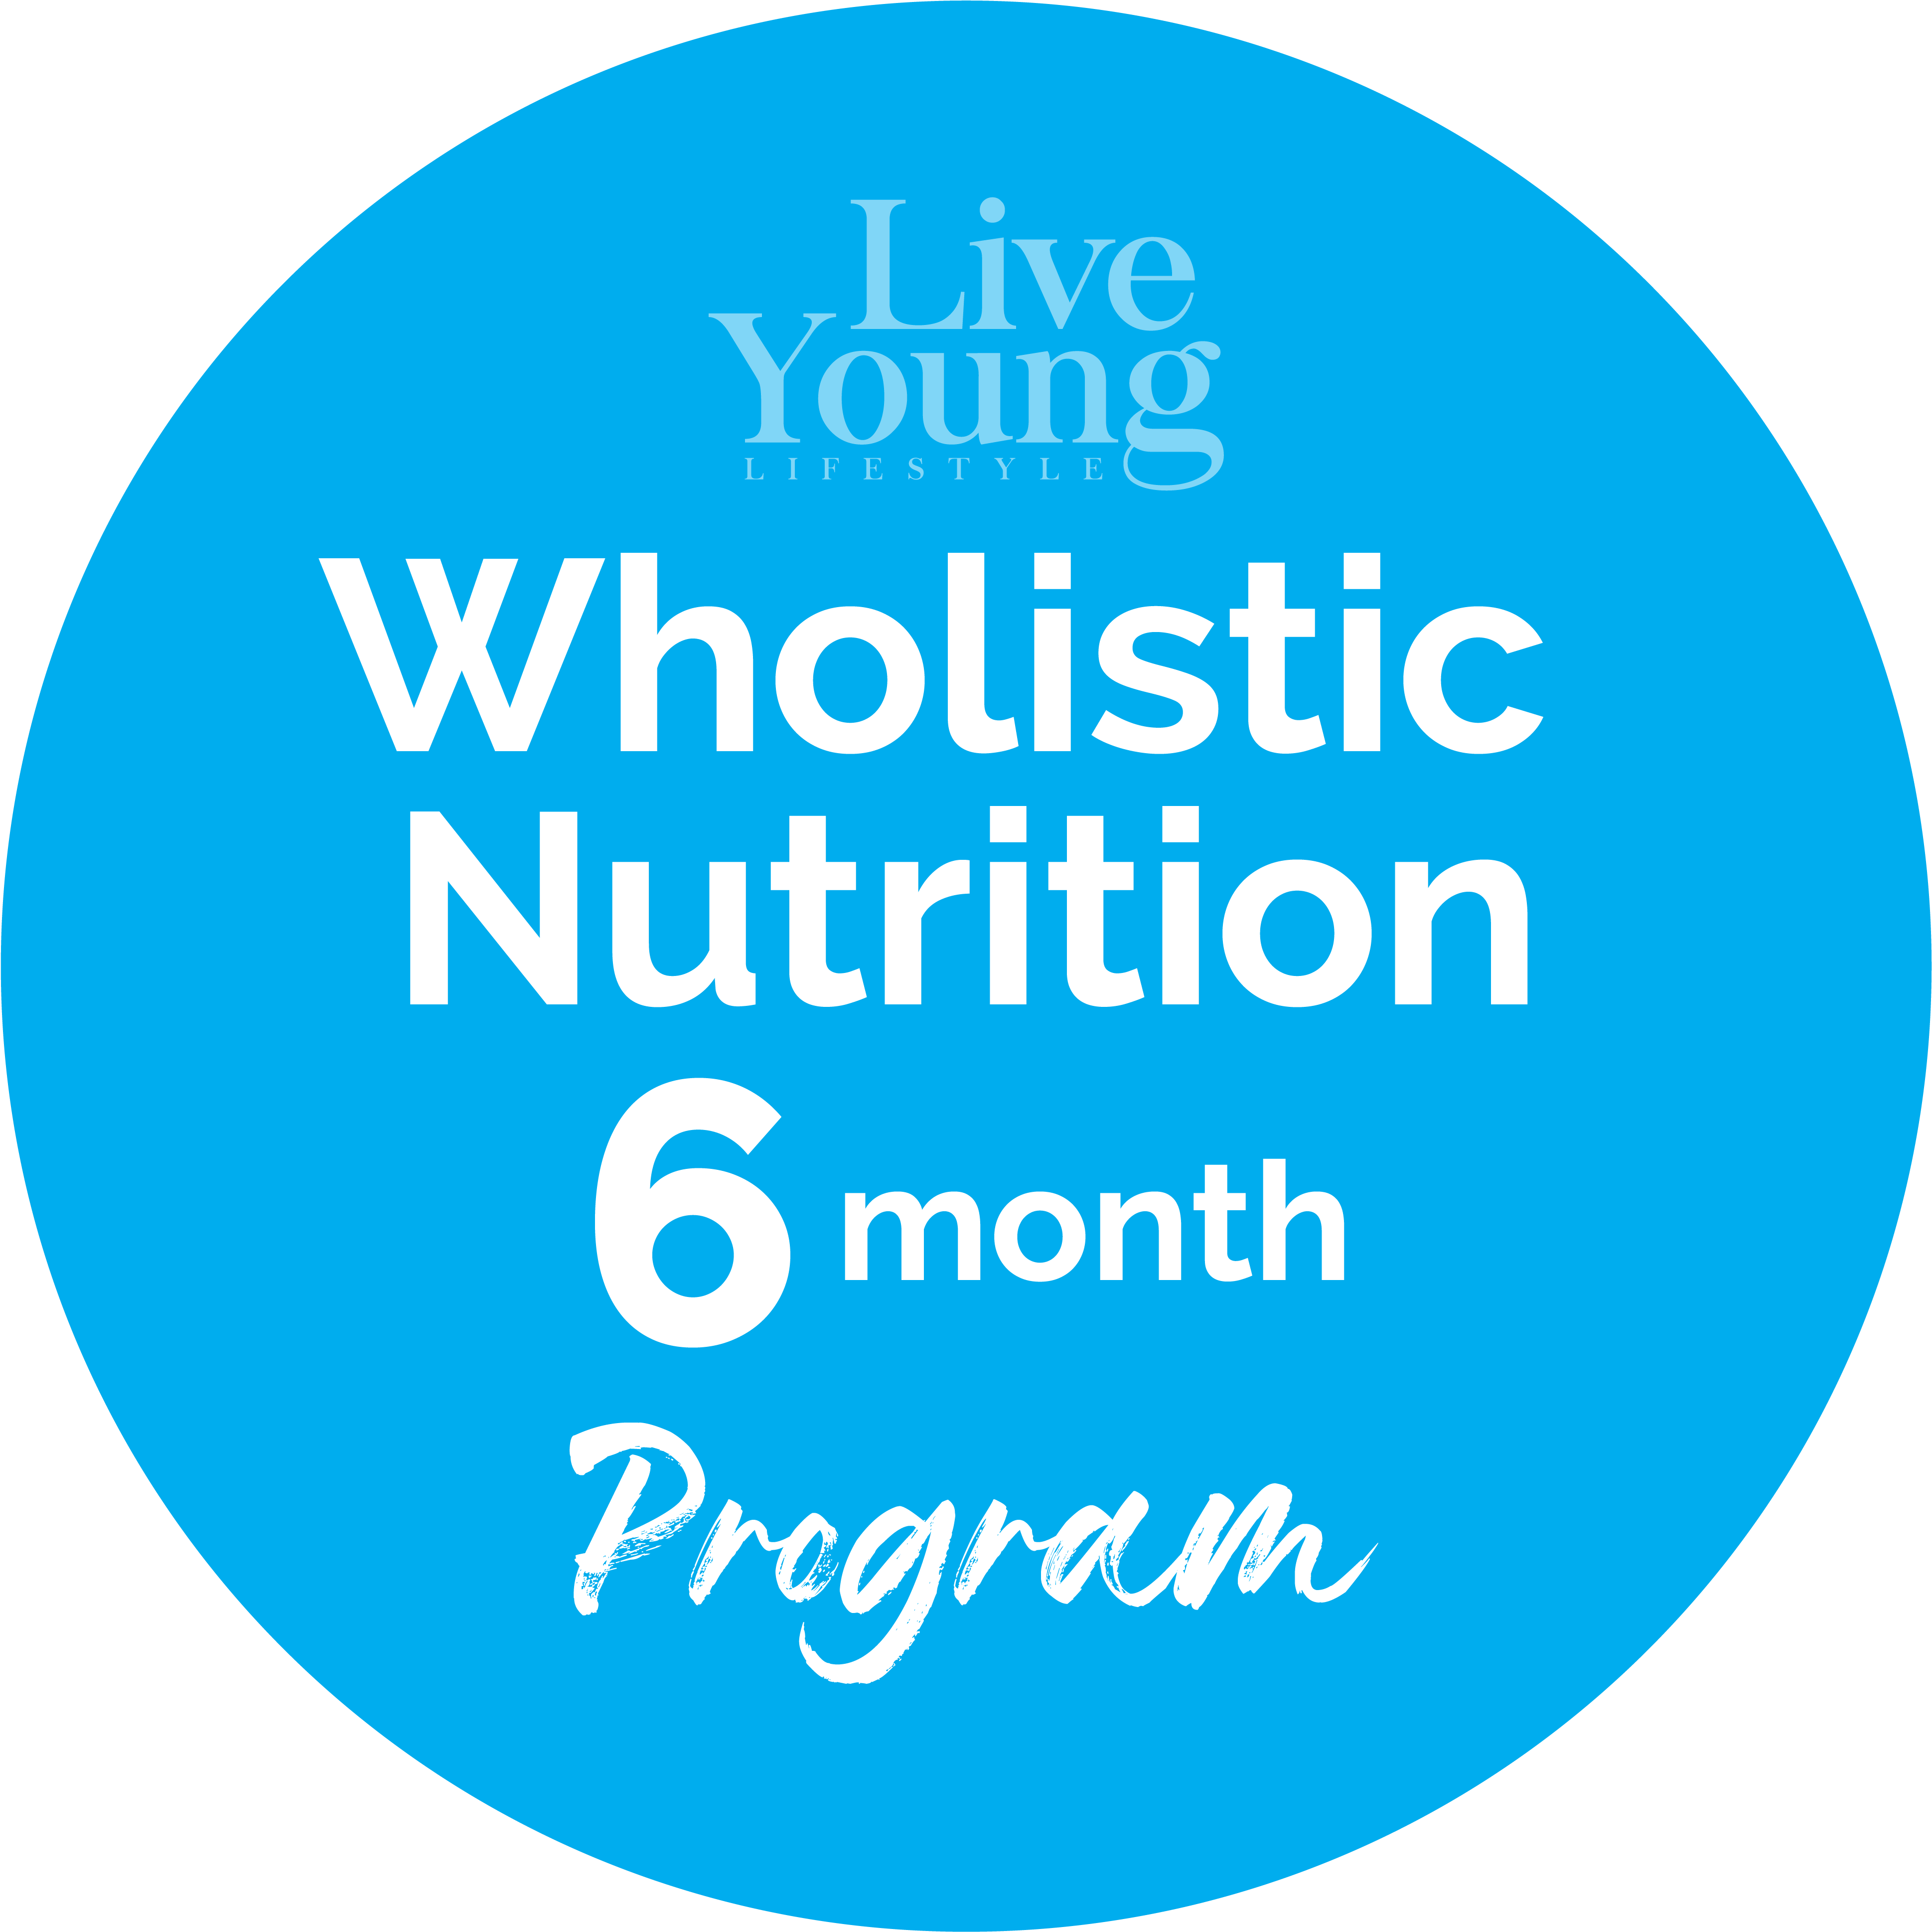 Wholistic Nutrition Icon Liveyoung - Circle Clipart - Large Size Png ...